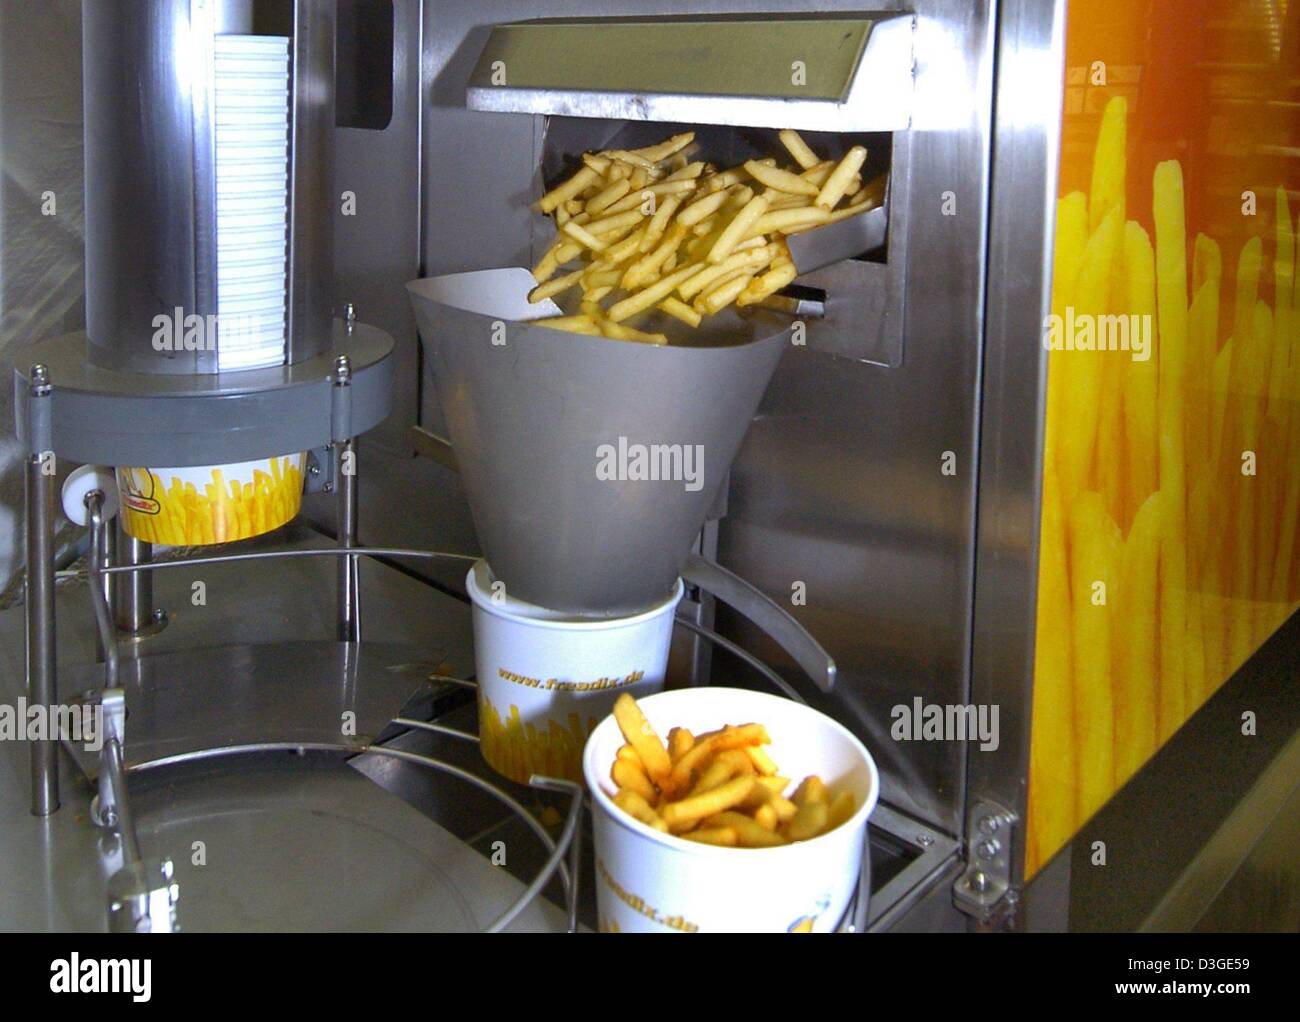 https://c8.alamy.com/comp/D3GE59/dpa-a-fresh-serving-of-french-fries-comes-out-of-a-vending-machine-D3GE59.jpg